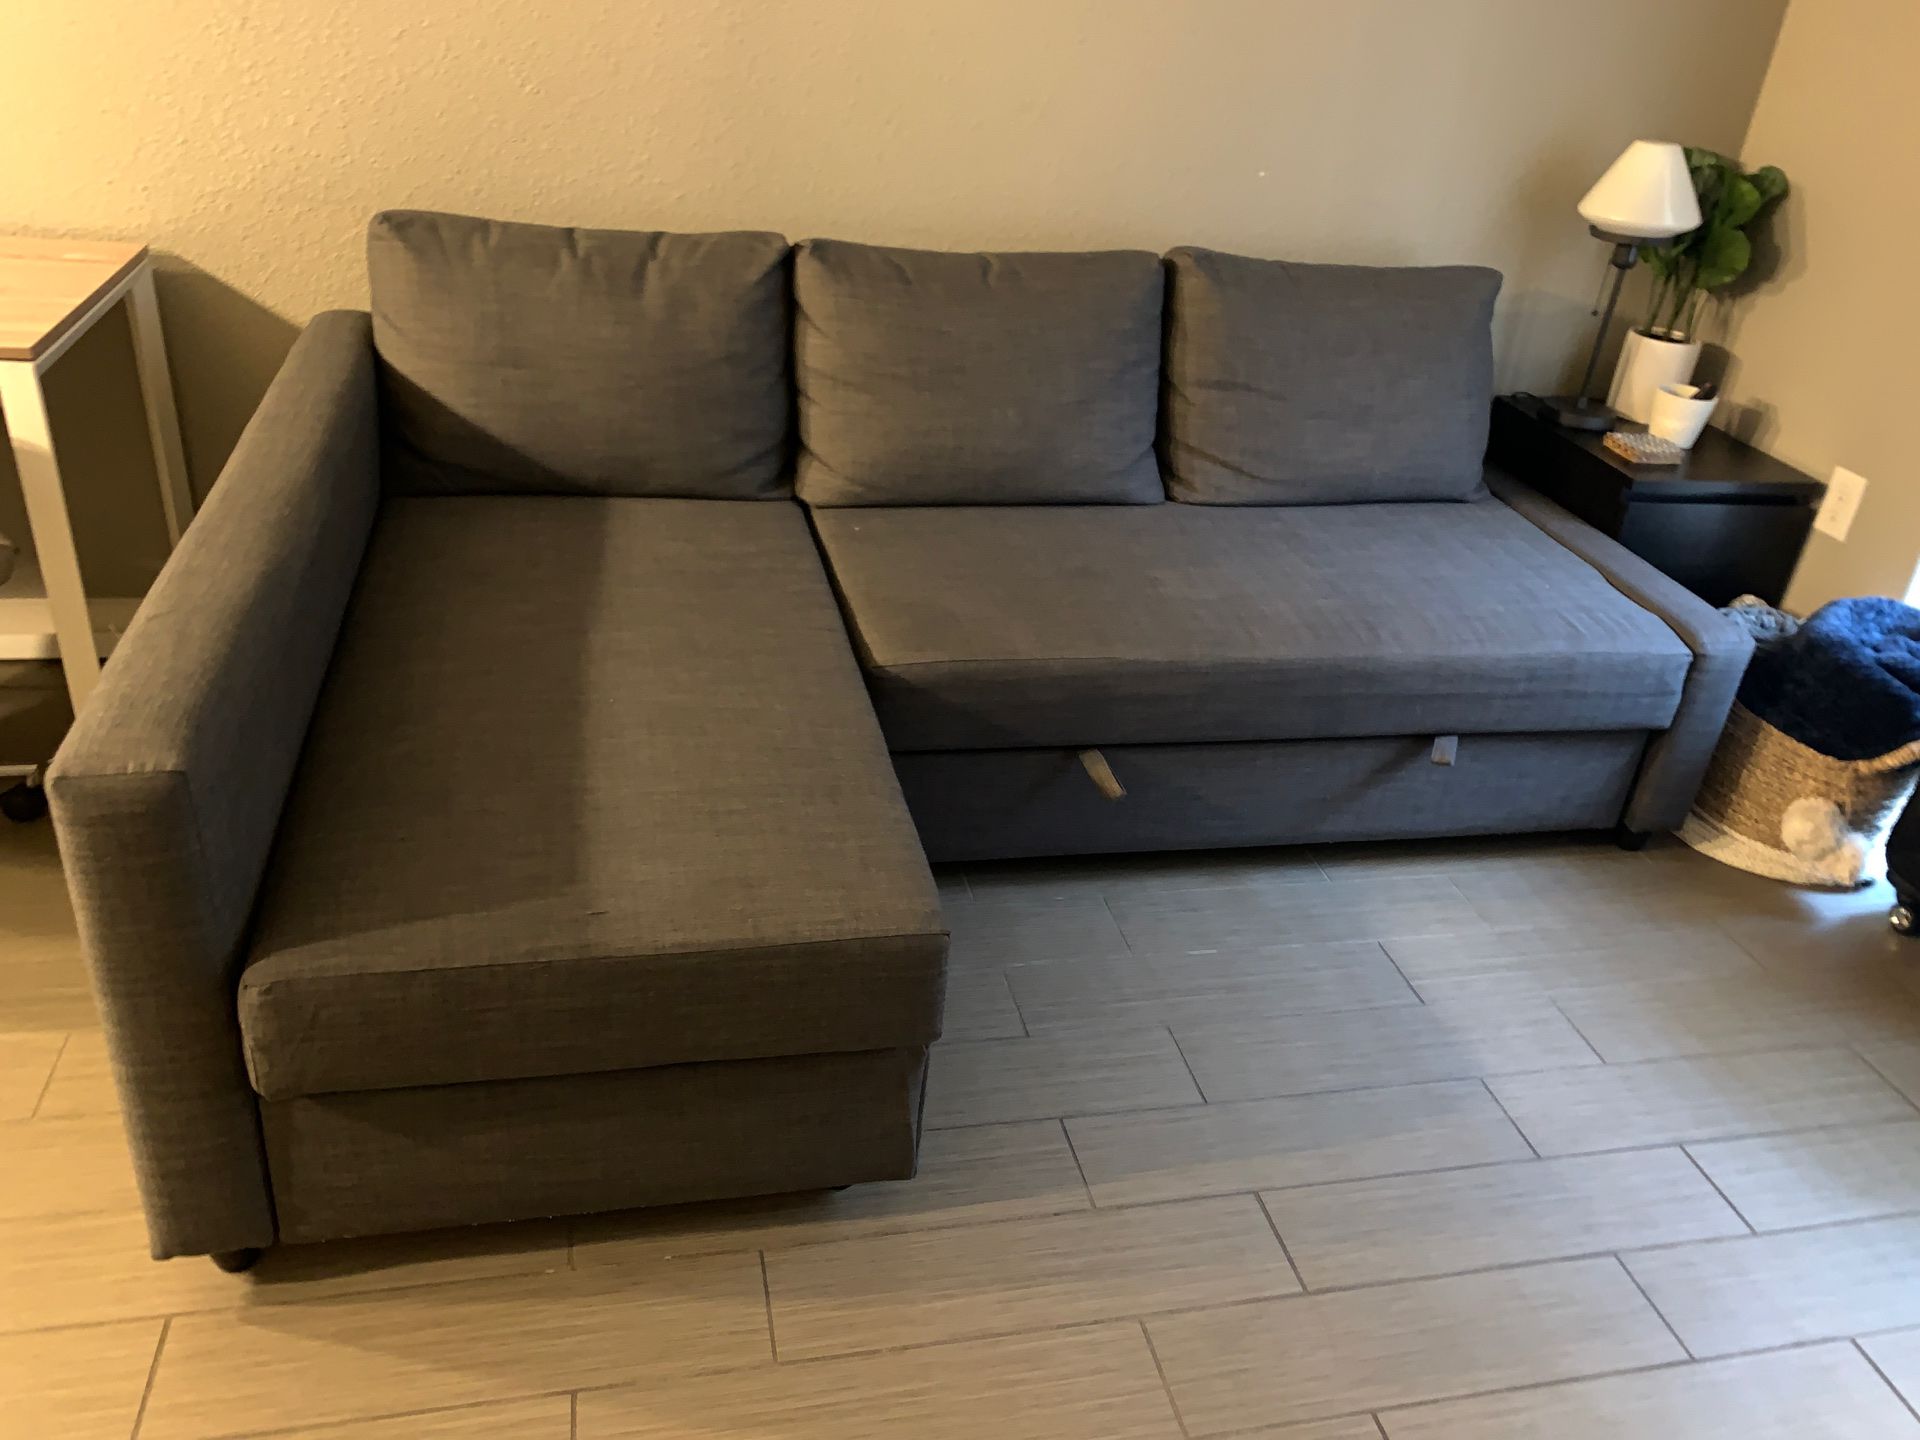 Sofa turns into queen size bed with storage